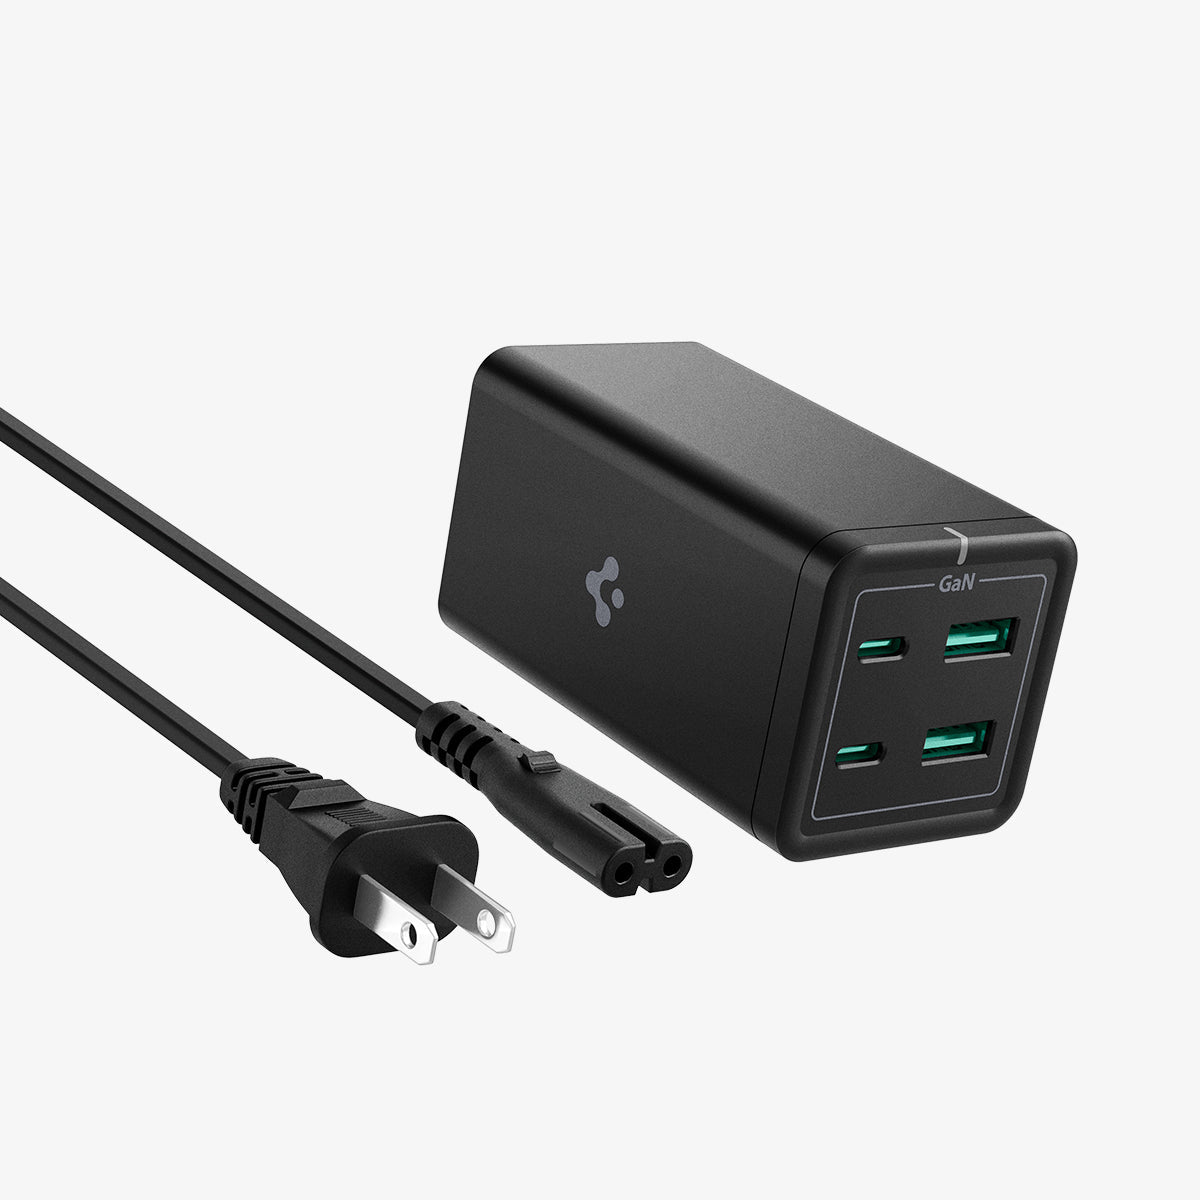 ACH03786 - Spigen ArcDock 120W Desktop Charger PD2100 in black showing the front and side with power plug next to it